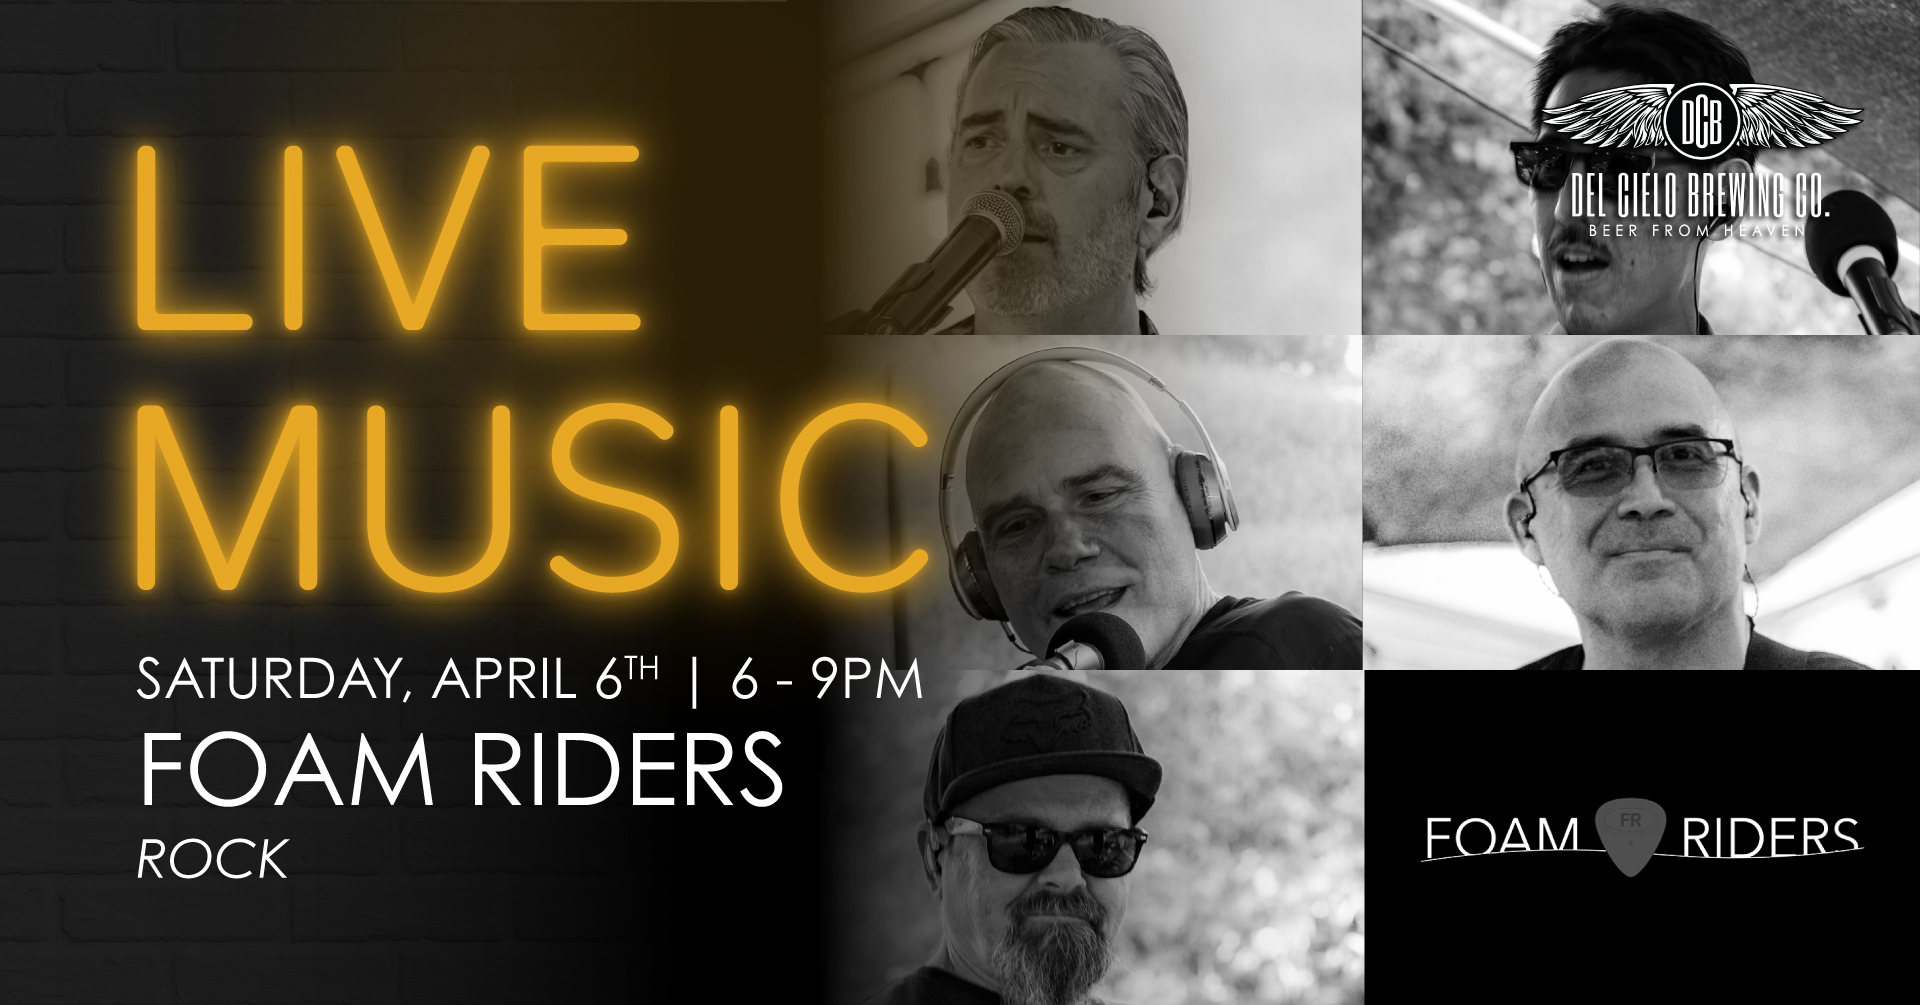 Live music by the foam riders // rock